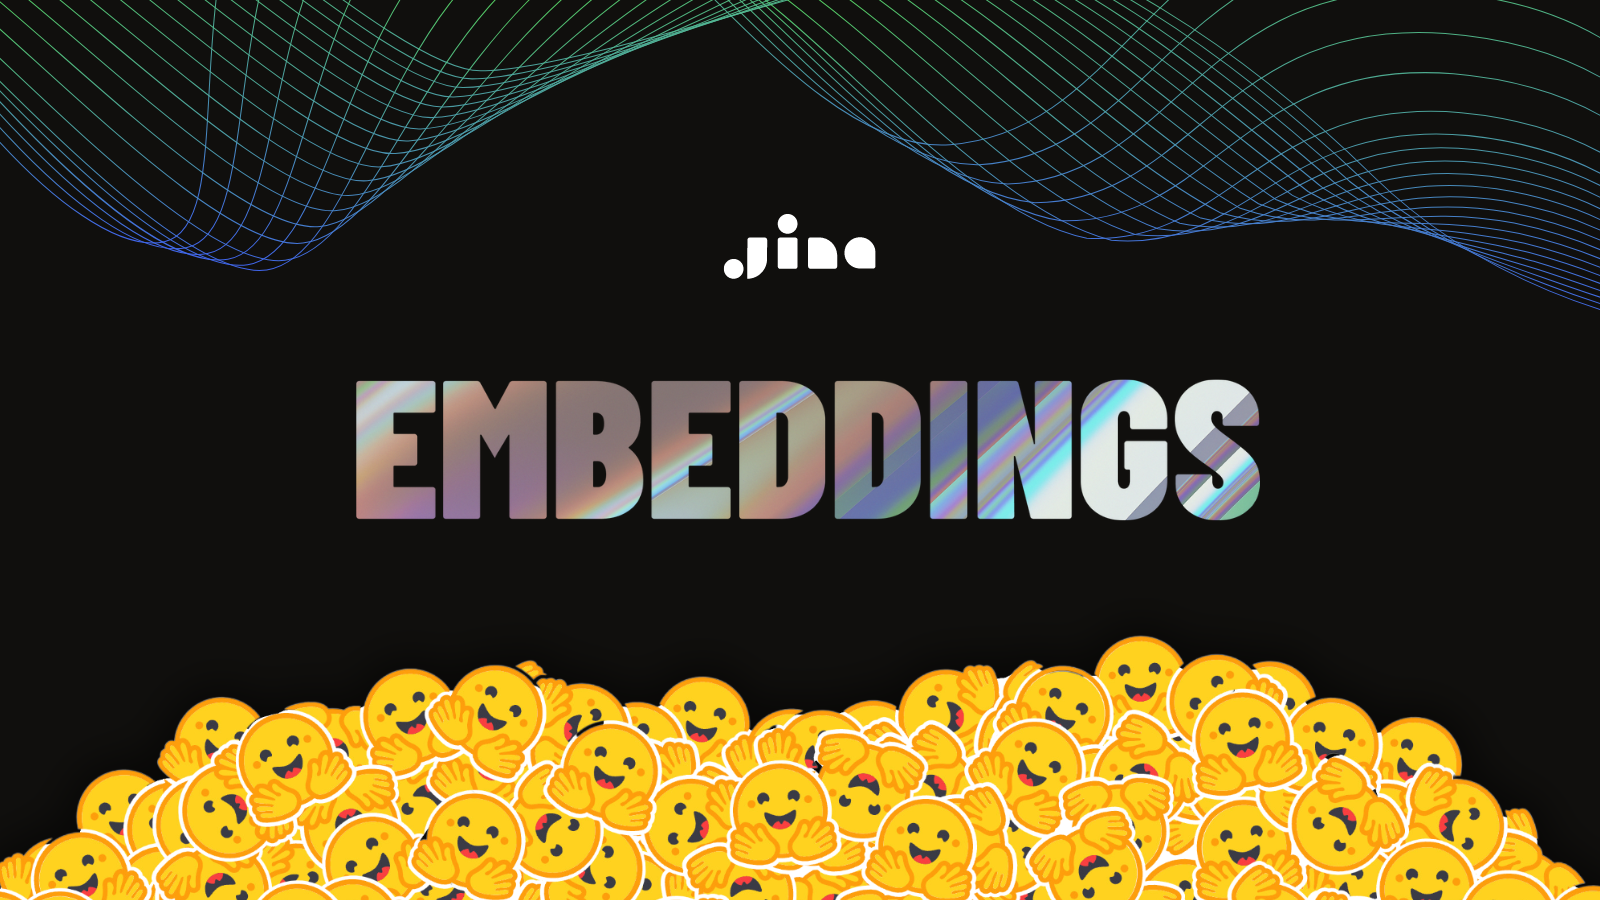 Colorful "EMBEDDINGS" text above a pile of yellow smileys on a black background with decorative lines at the top.